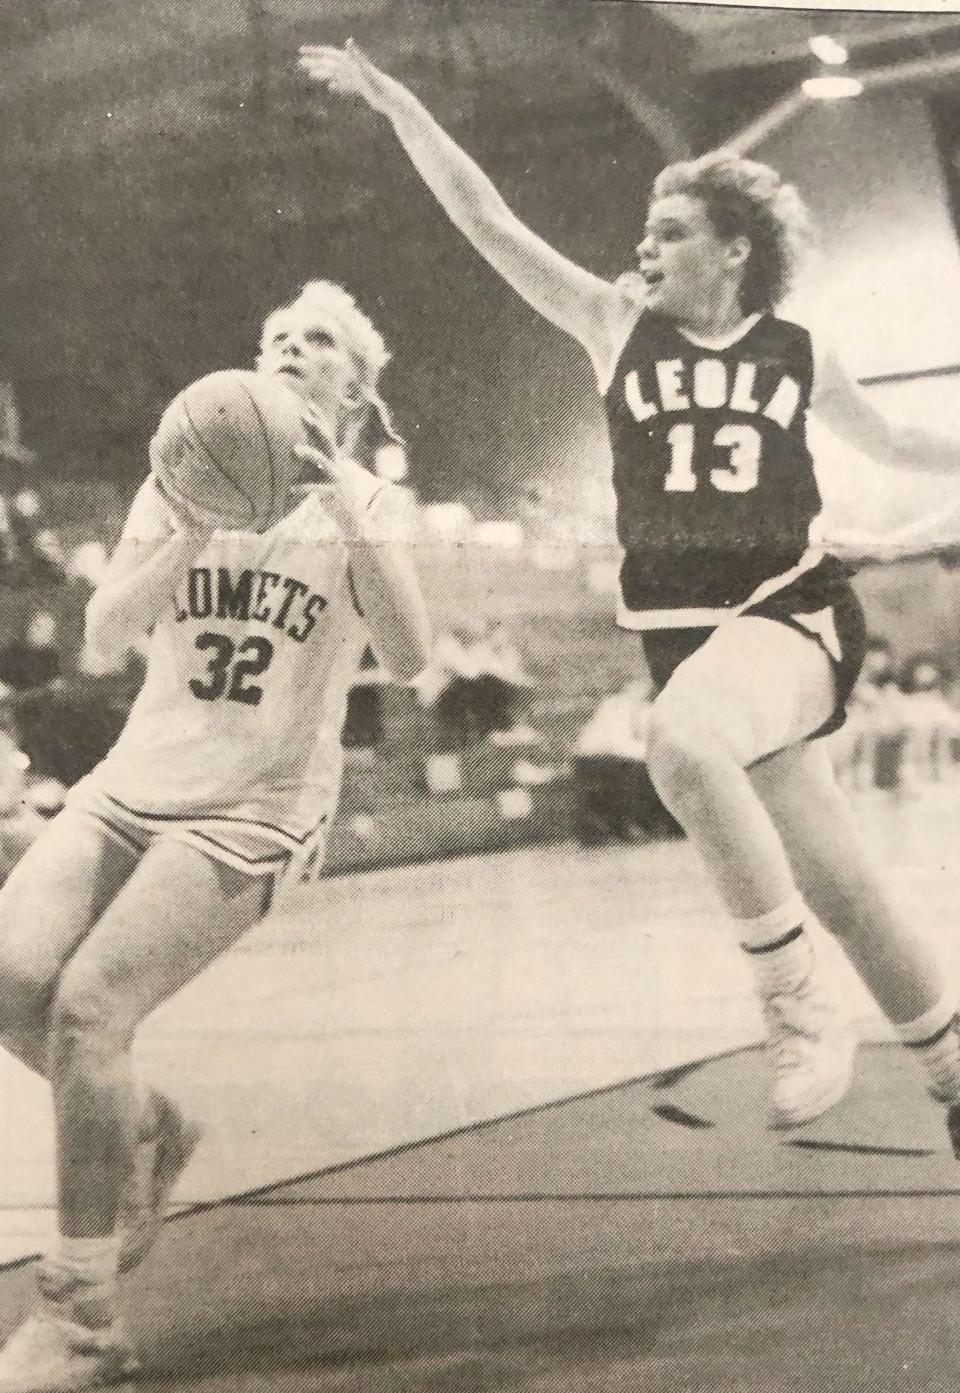 South Shore's Traci Jensen goes up for a shot against Leola's Beth Blumhardt during the 1986 Region 1B girls basketball tournament at Webster. Jensen scored 18 points to lead South Shore to a 43-32 semifinal win.